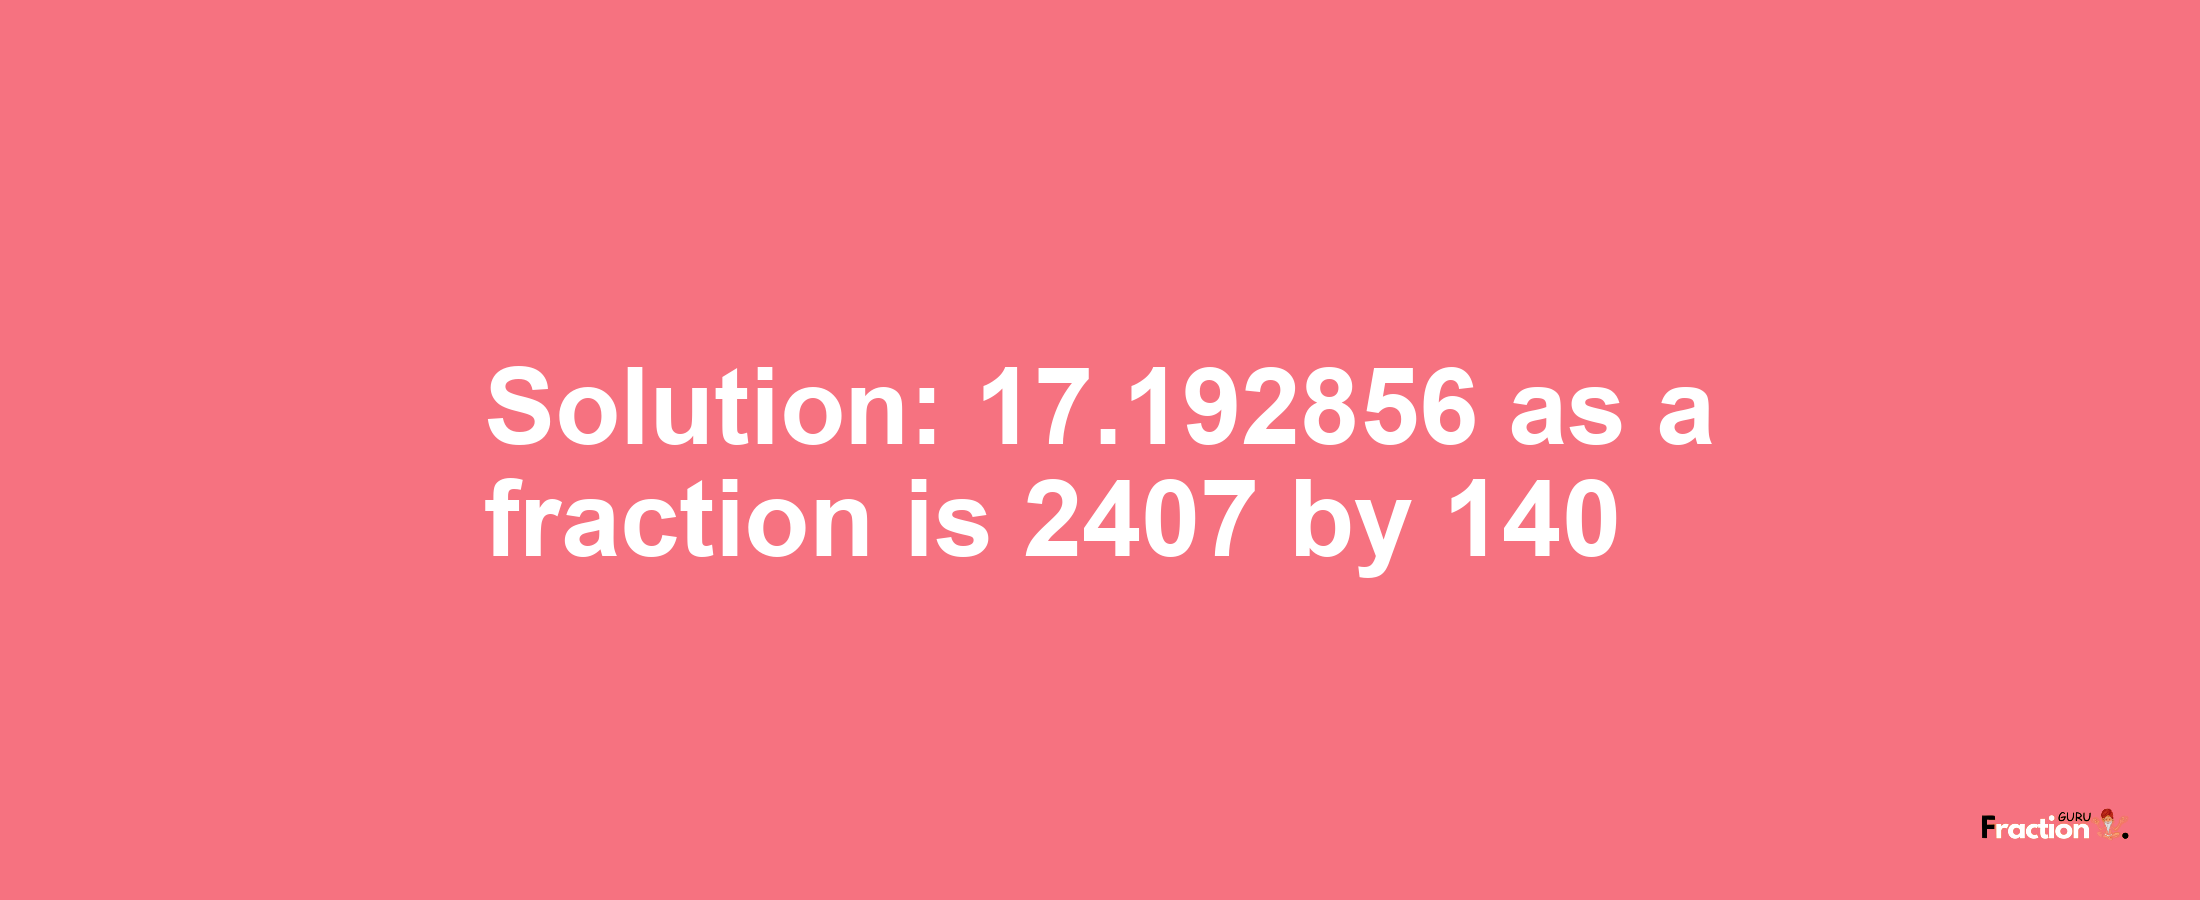 Solution:17.192856 as a fraction is 2407/140